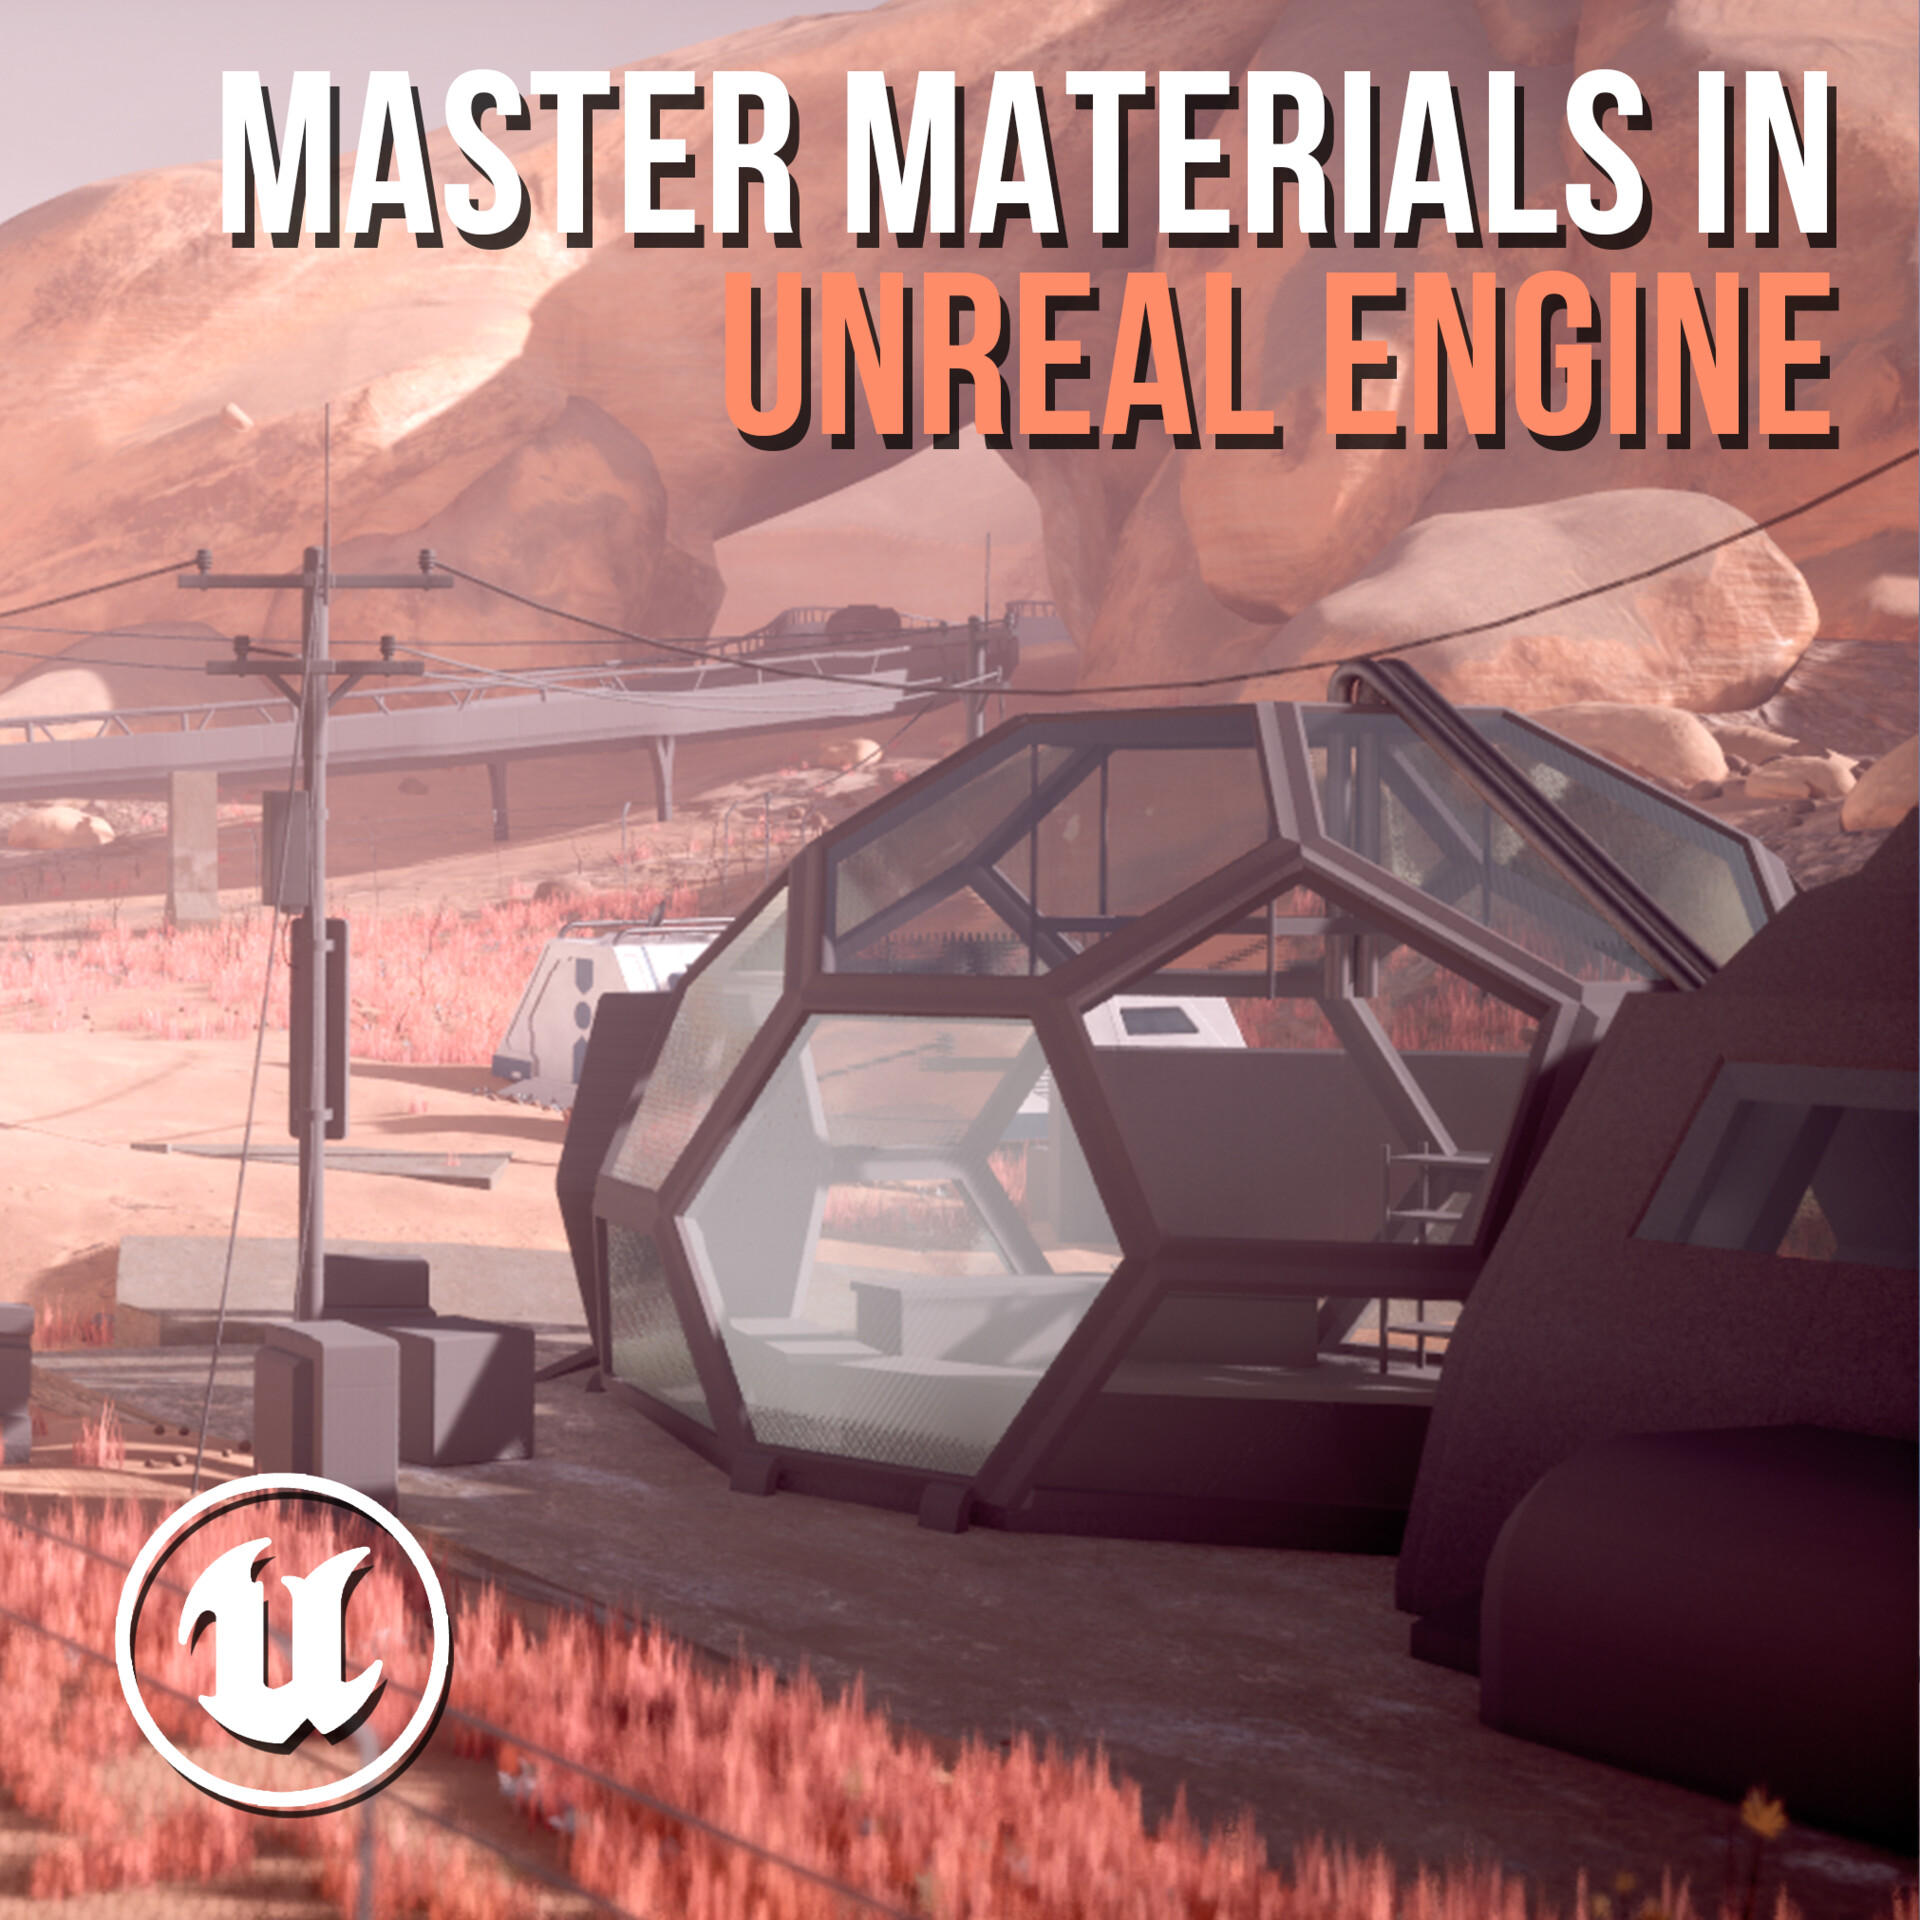 ArtStation - How To Make A Basic Master Material in Unreal Engine as a  Beginner